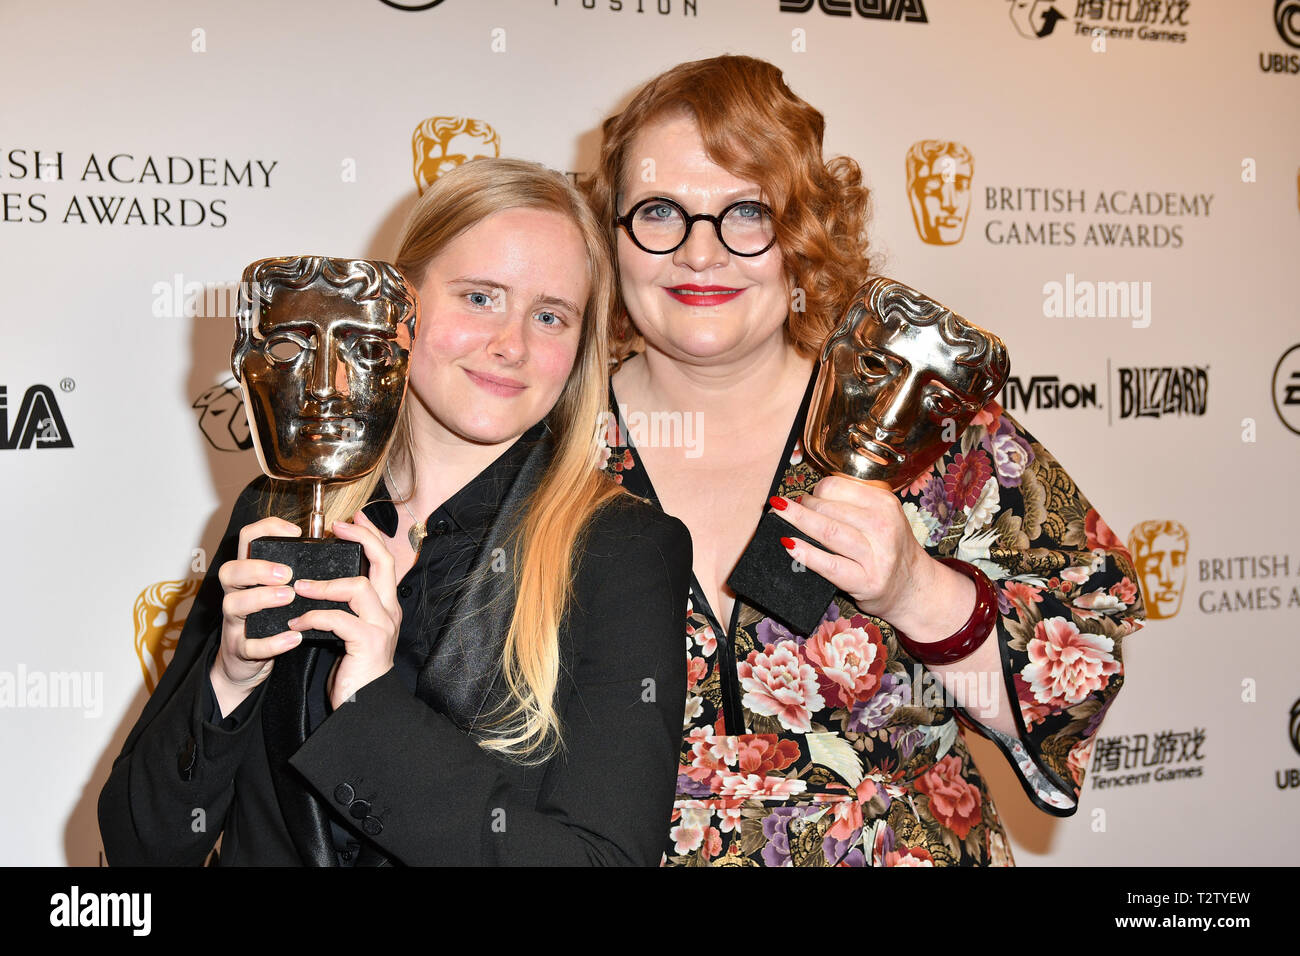 London, UK. 4th Apr 2019. Winner: My Child Lebensborn by Catharina Bohler and Elin Festoy  at the British Academy (BAFTA) Games Awards at Queen Elizabeth Hall, Southbank Centre  on 4 March 2019, London, UK. Credit: Picture Capital/Alamy Live News Stock Photo